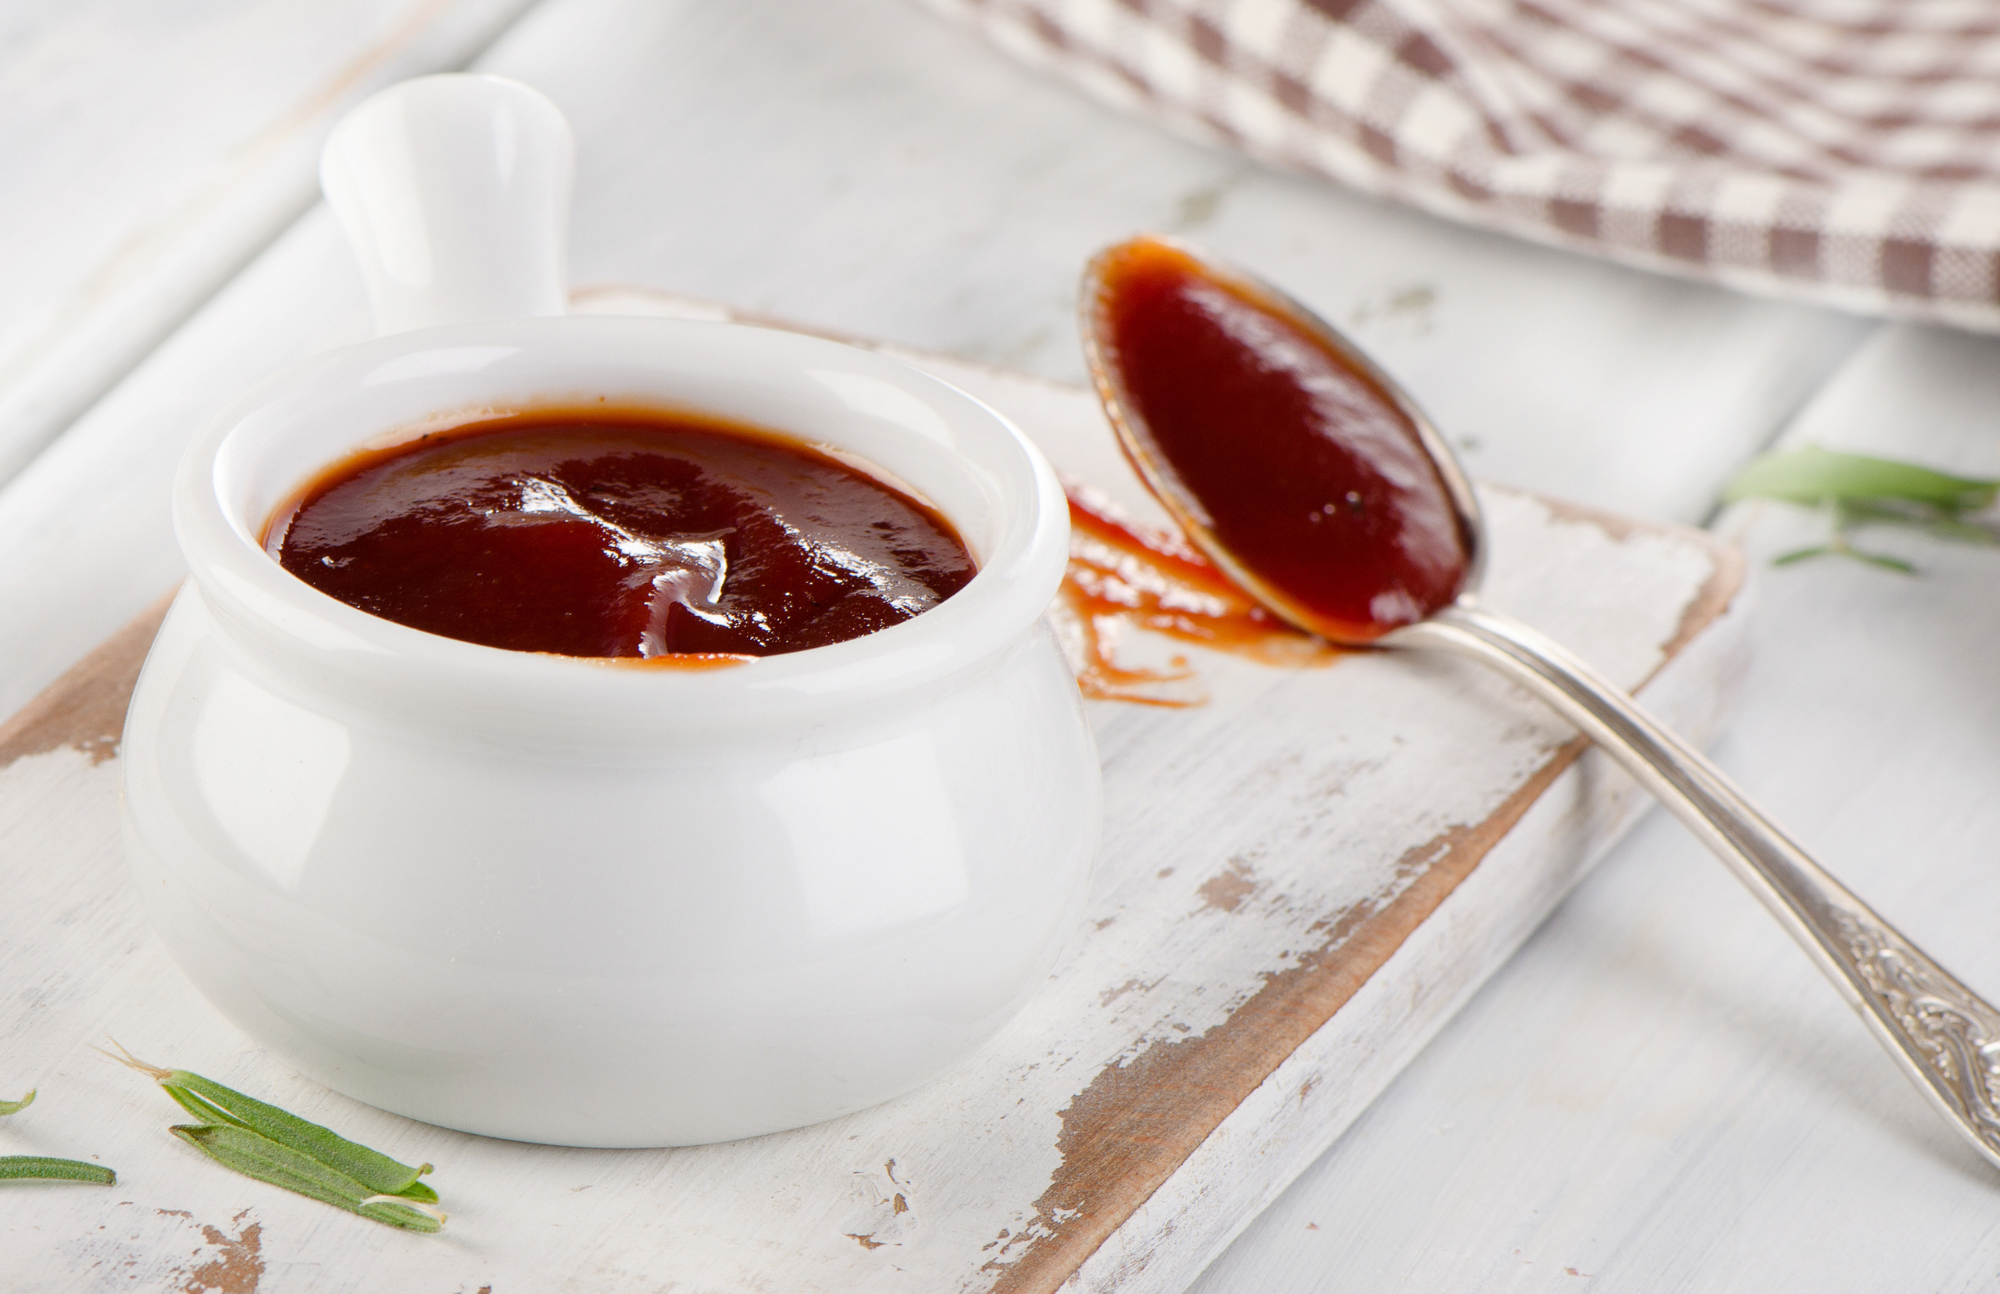 Barbeque sauce in a white dish on a white plate with a spoon and napkin pictured on a table